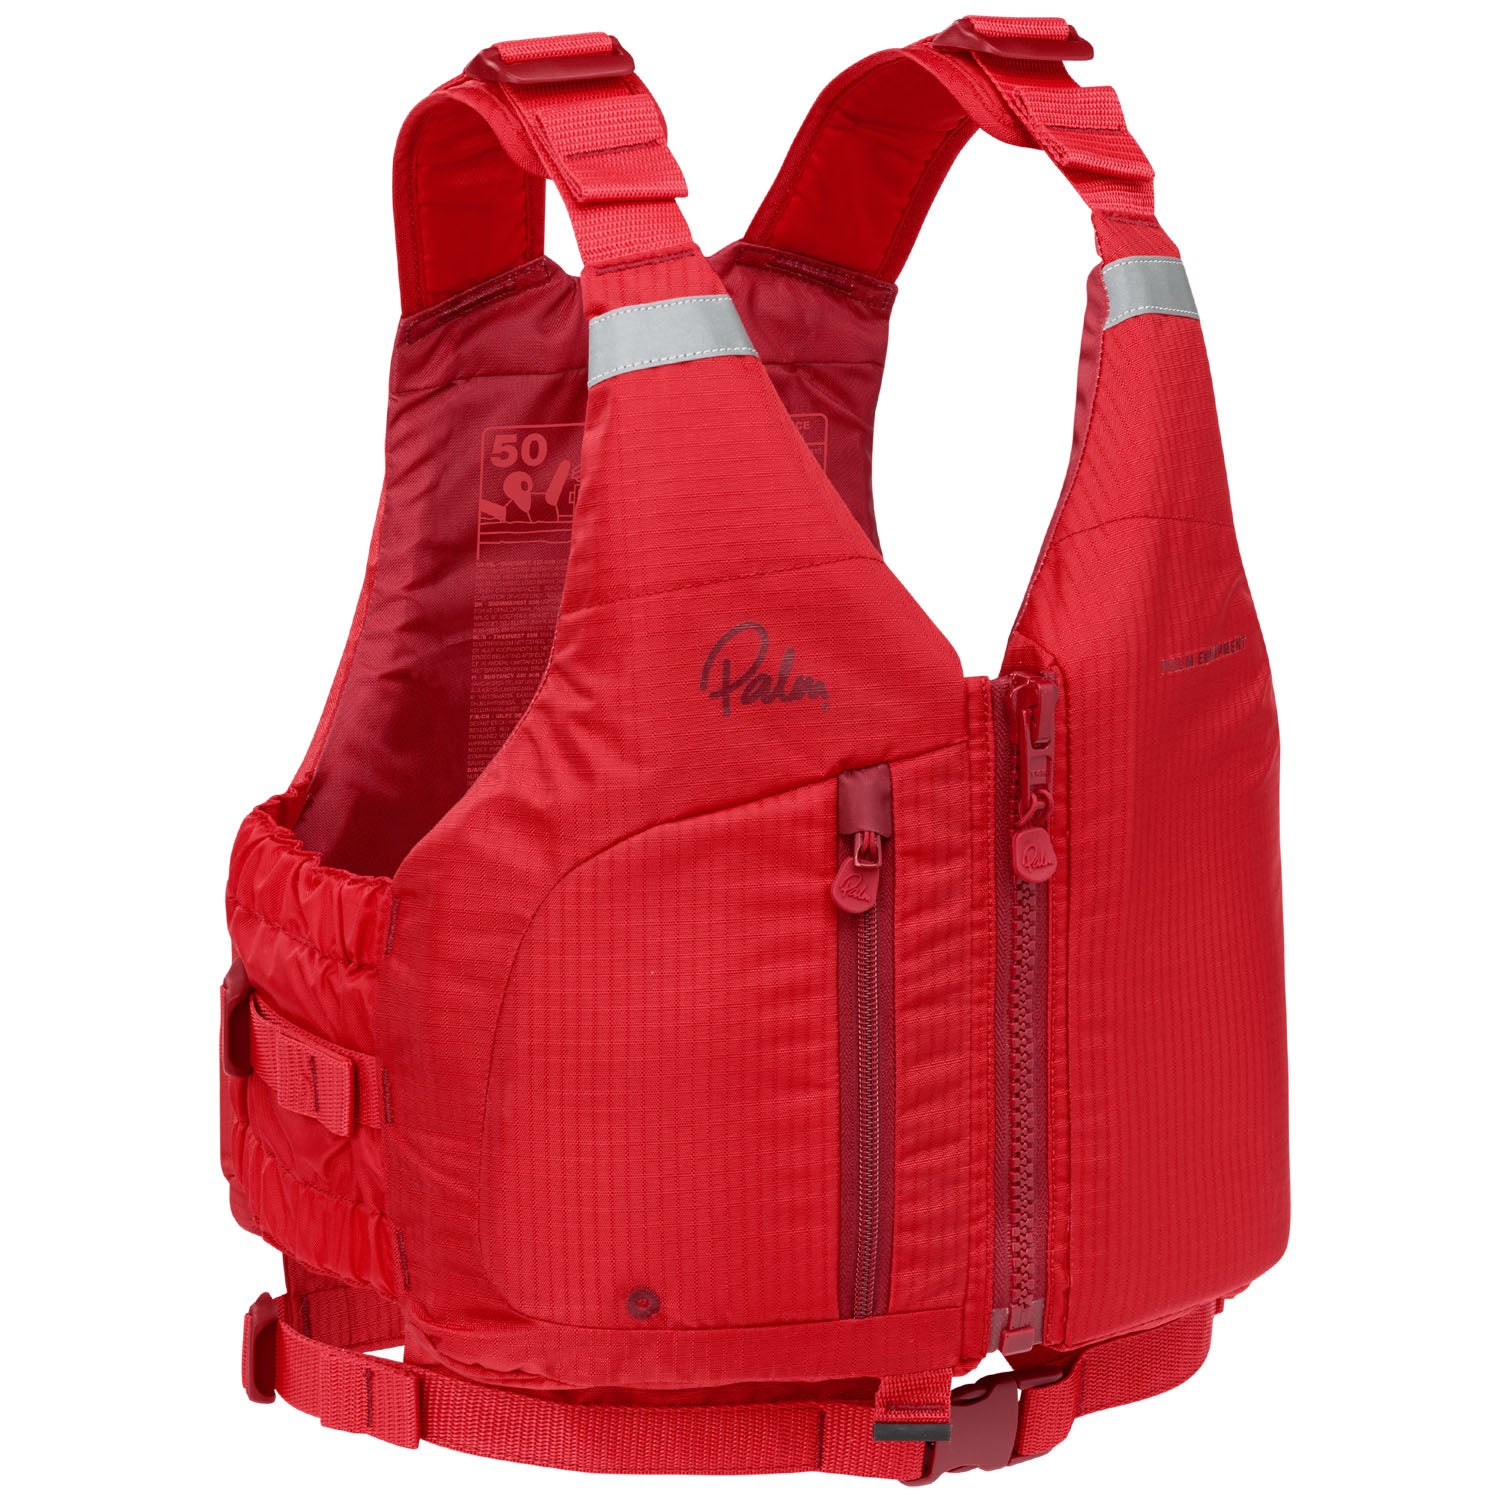 Palm Meander Womens Buoyancy Aid in Flame Red